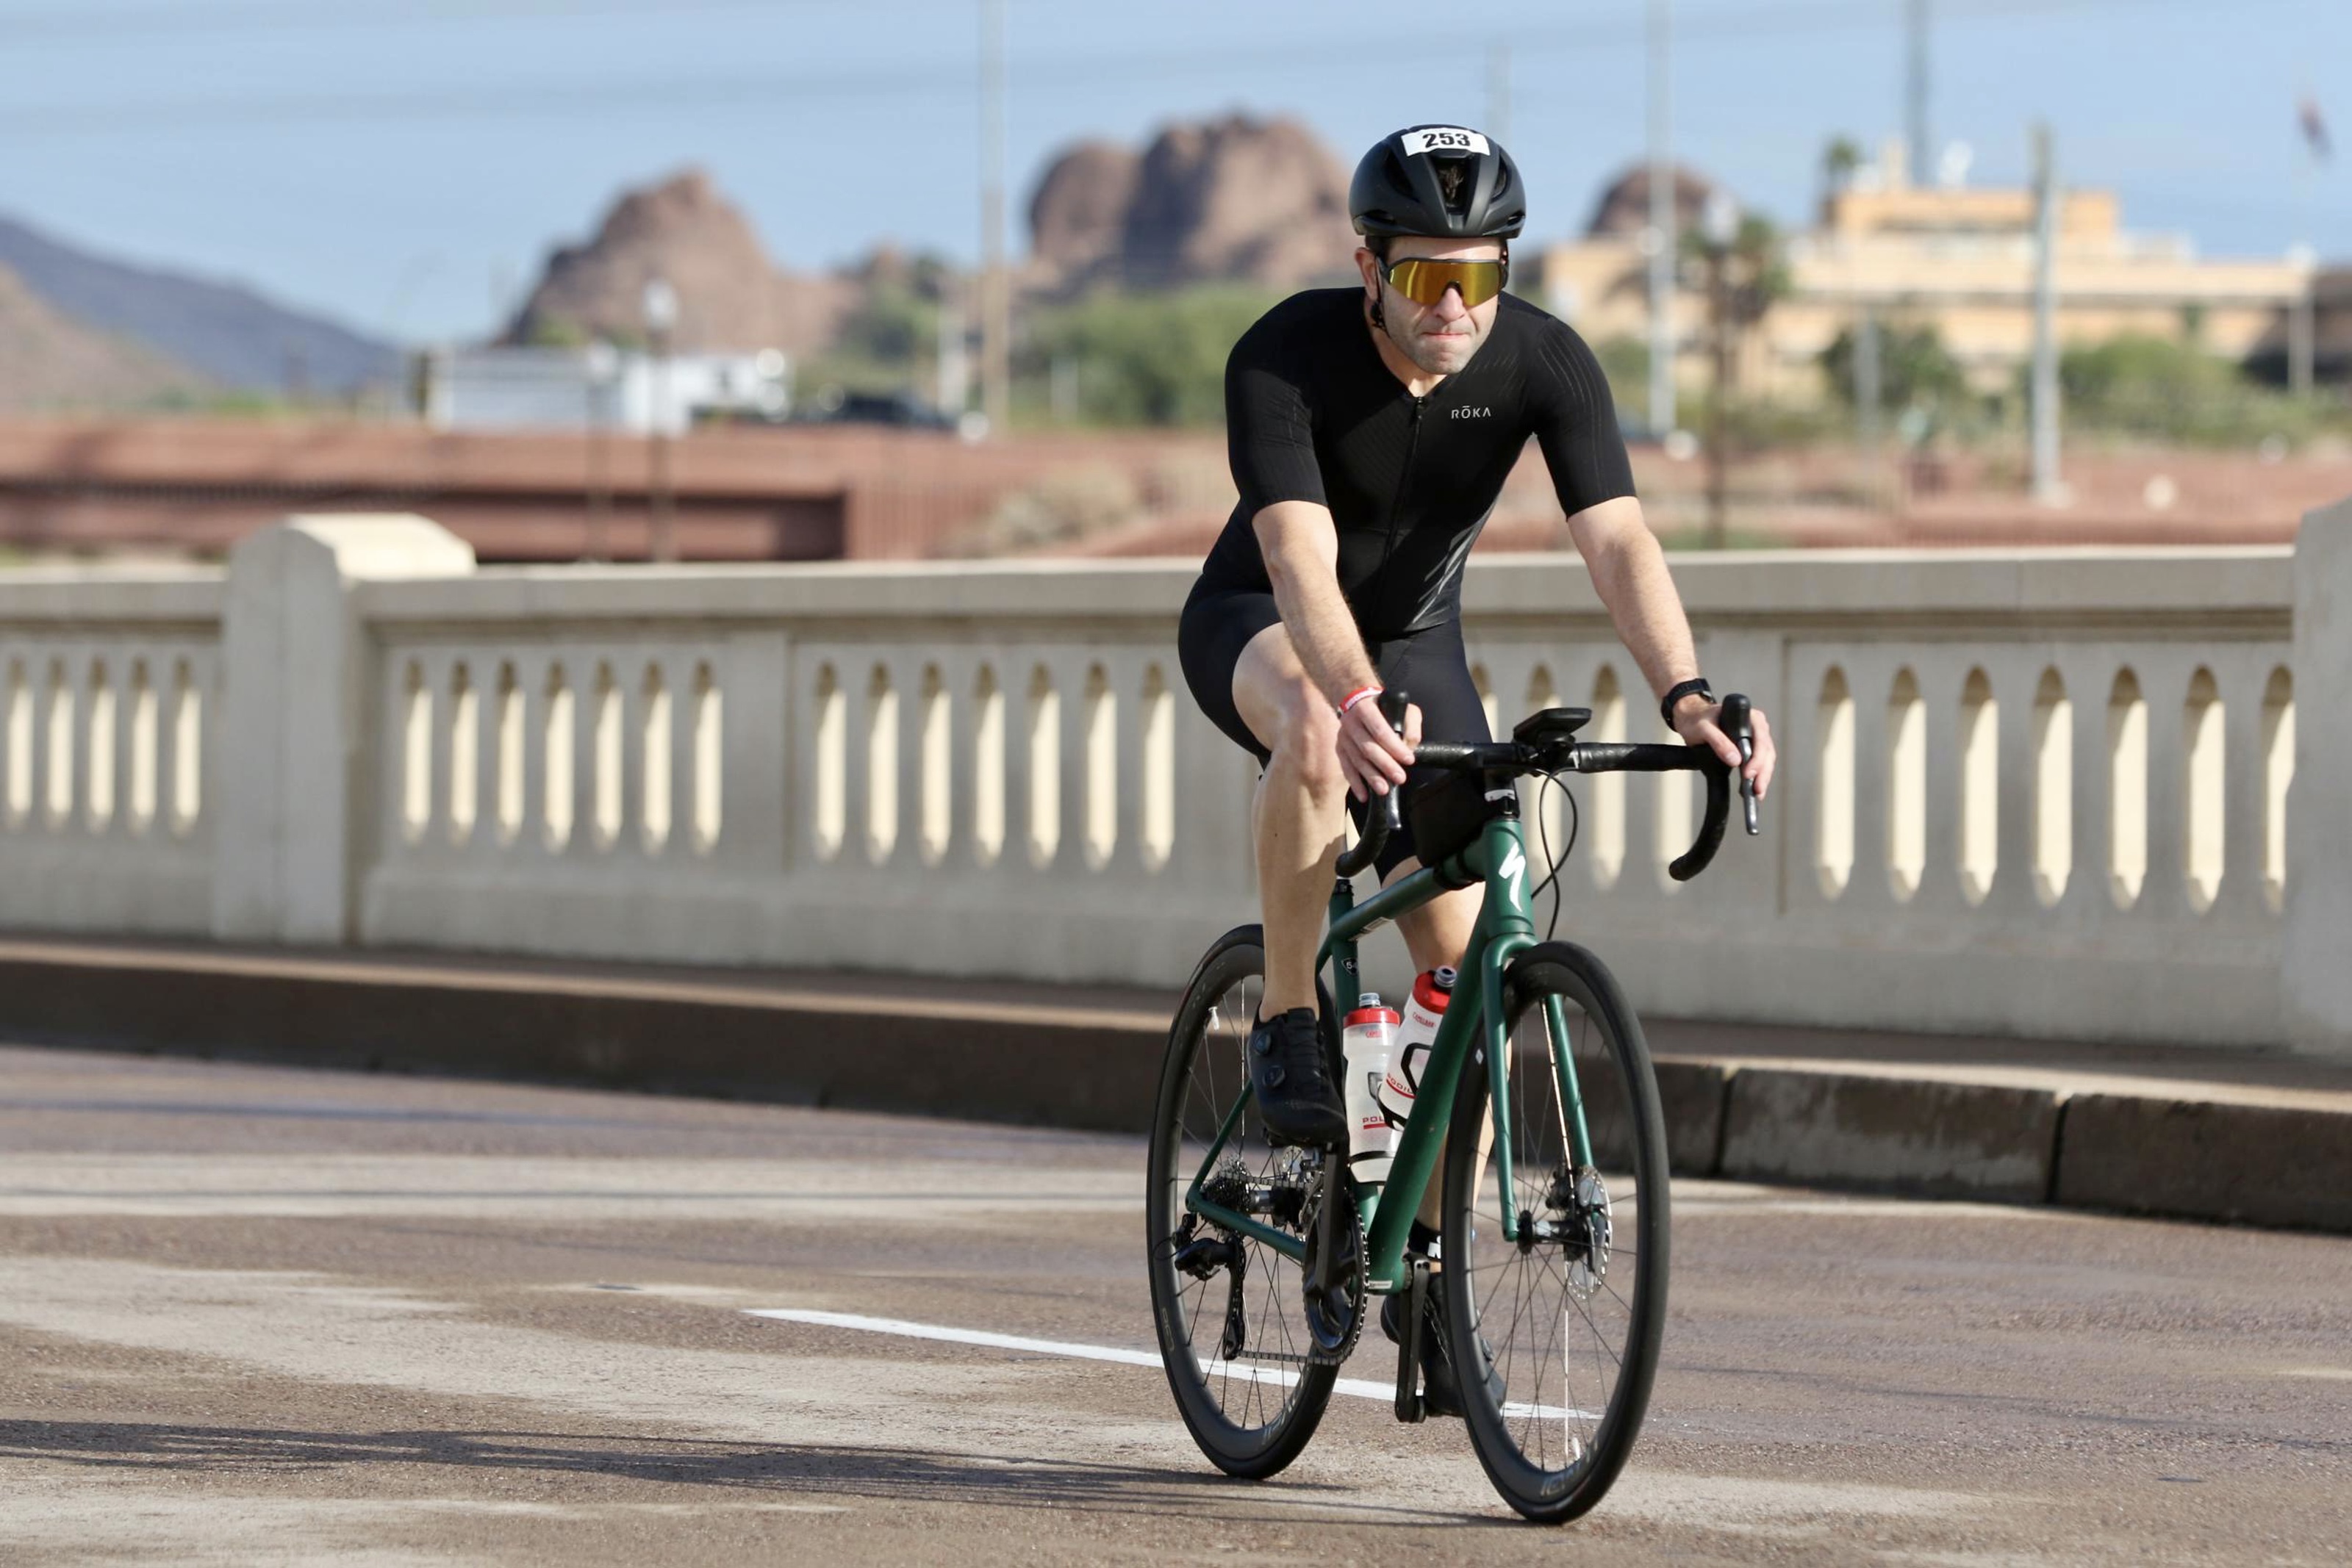 Me, riding a green Specialized Aethos bike on Mill Avenue bridge in Tempe. I'm wearing a black helmet, gold sunglasses, black tri suit, and black shoes.